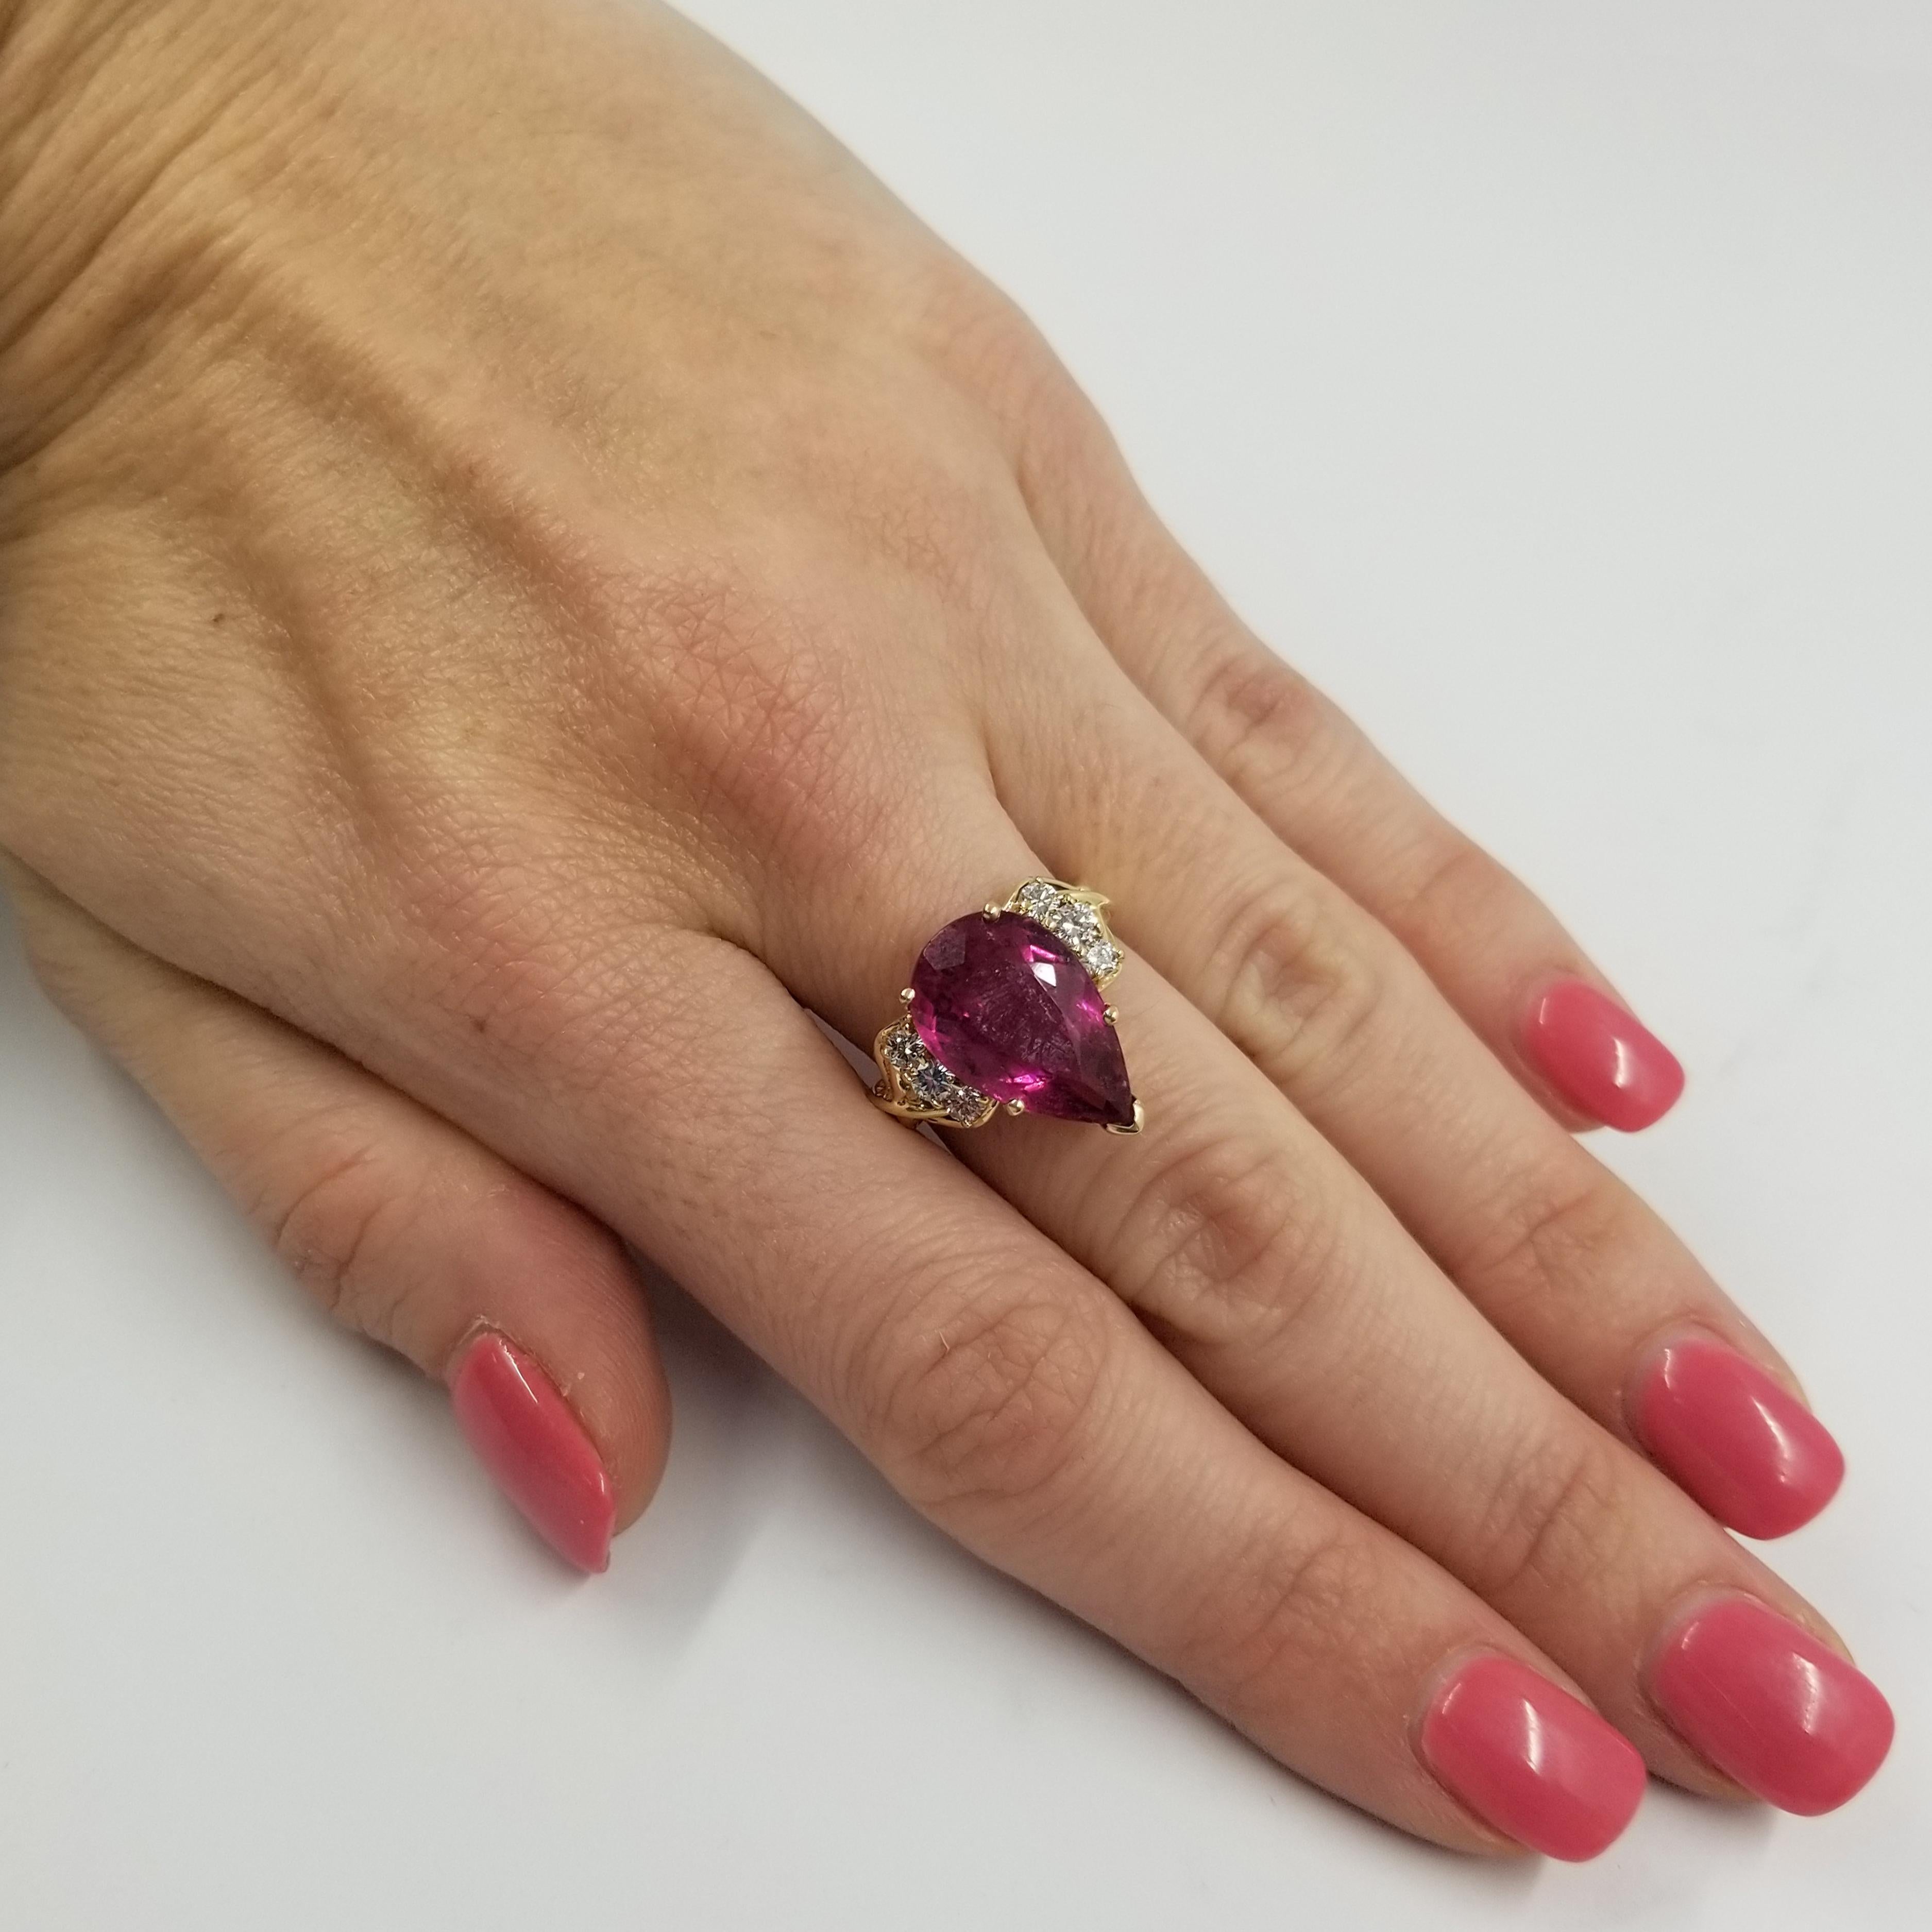 14 Karat Yellow Gold Ring Featuring A Pear Shaped Pink Tourmaline Weighing Approximately 5 Carats. It is Complimented by 6 Round Diamonds Totaling Approximately 0.25 Carat Total Weight of SI Clarity & J Color. Current Ring Size is 6.25; Your